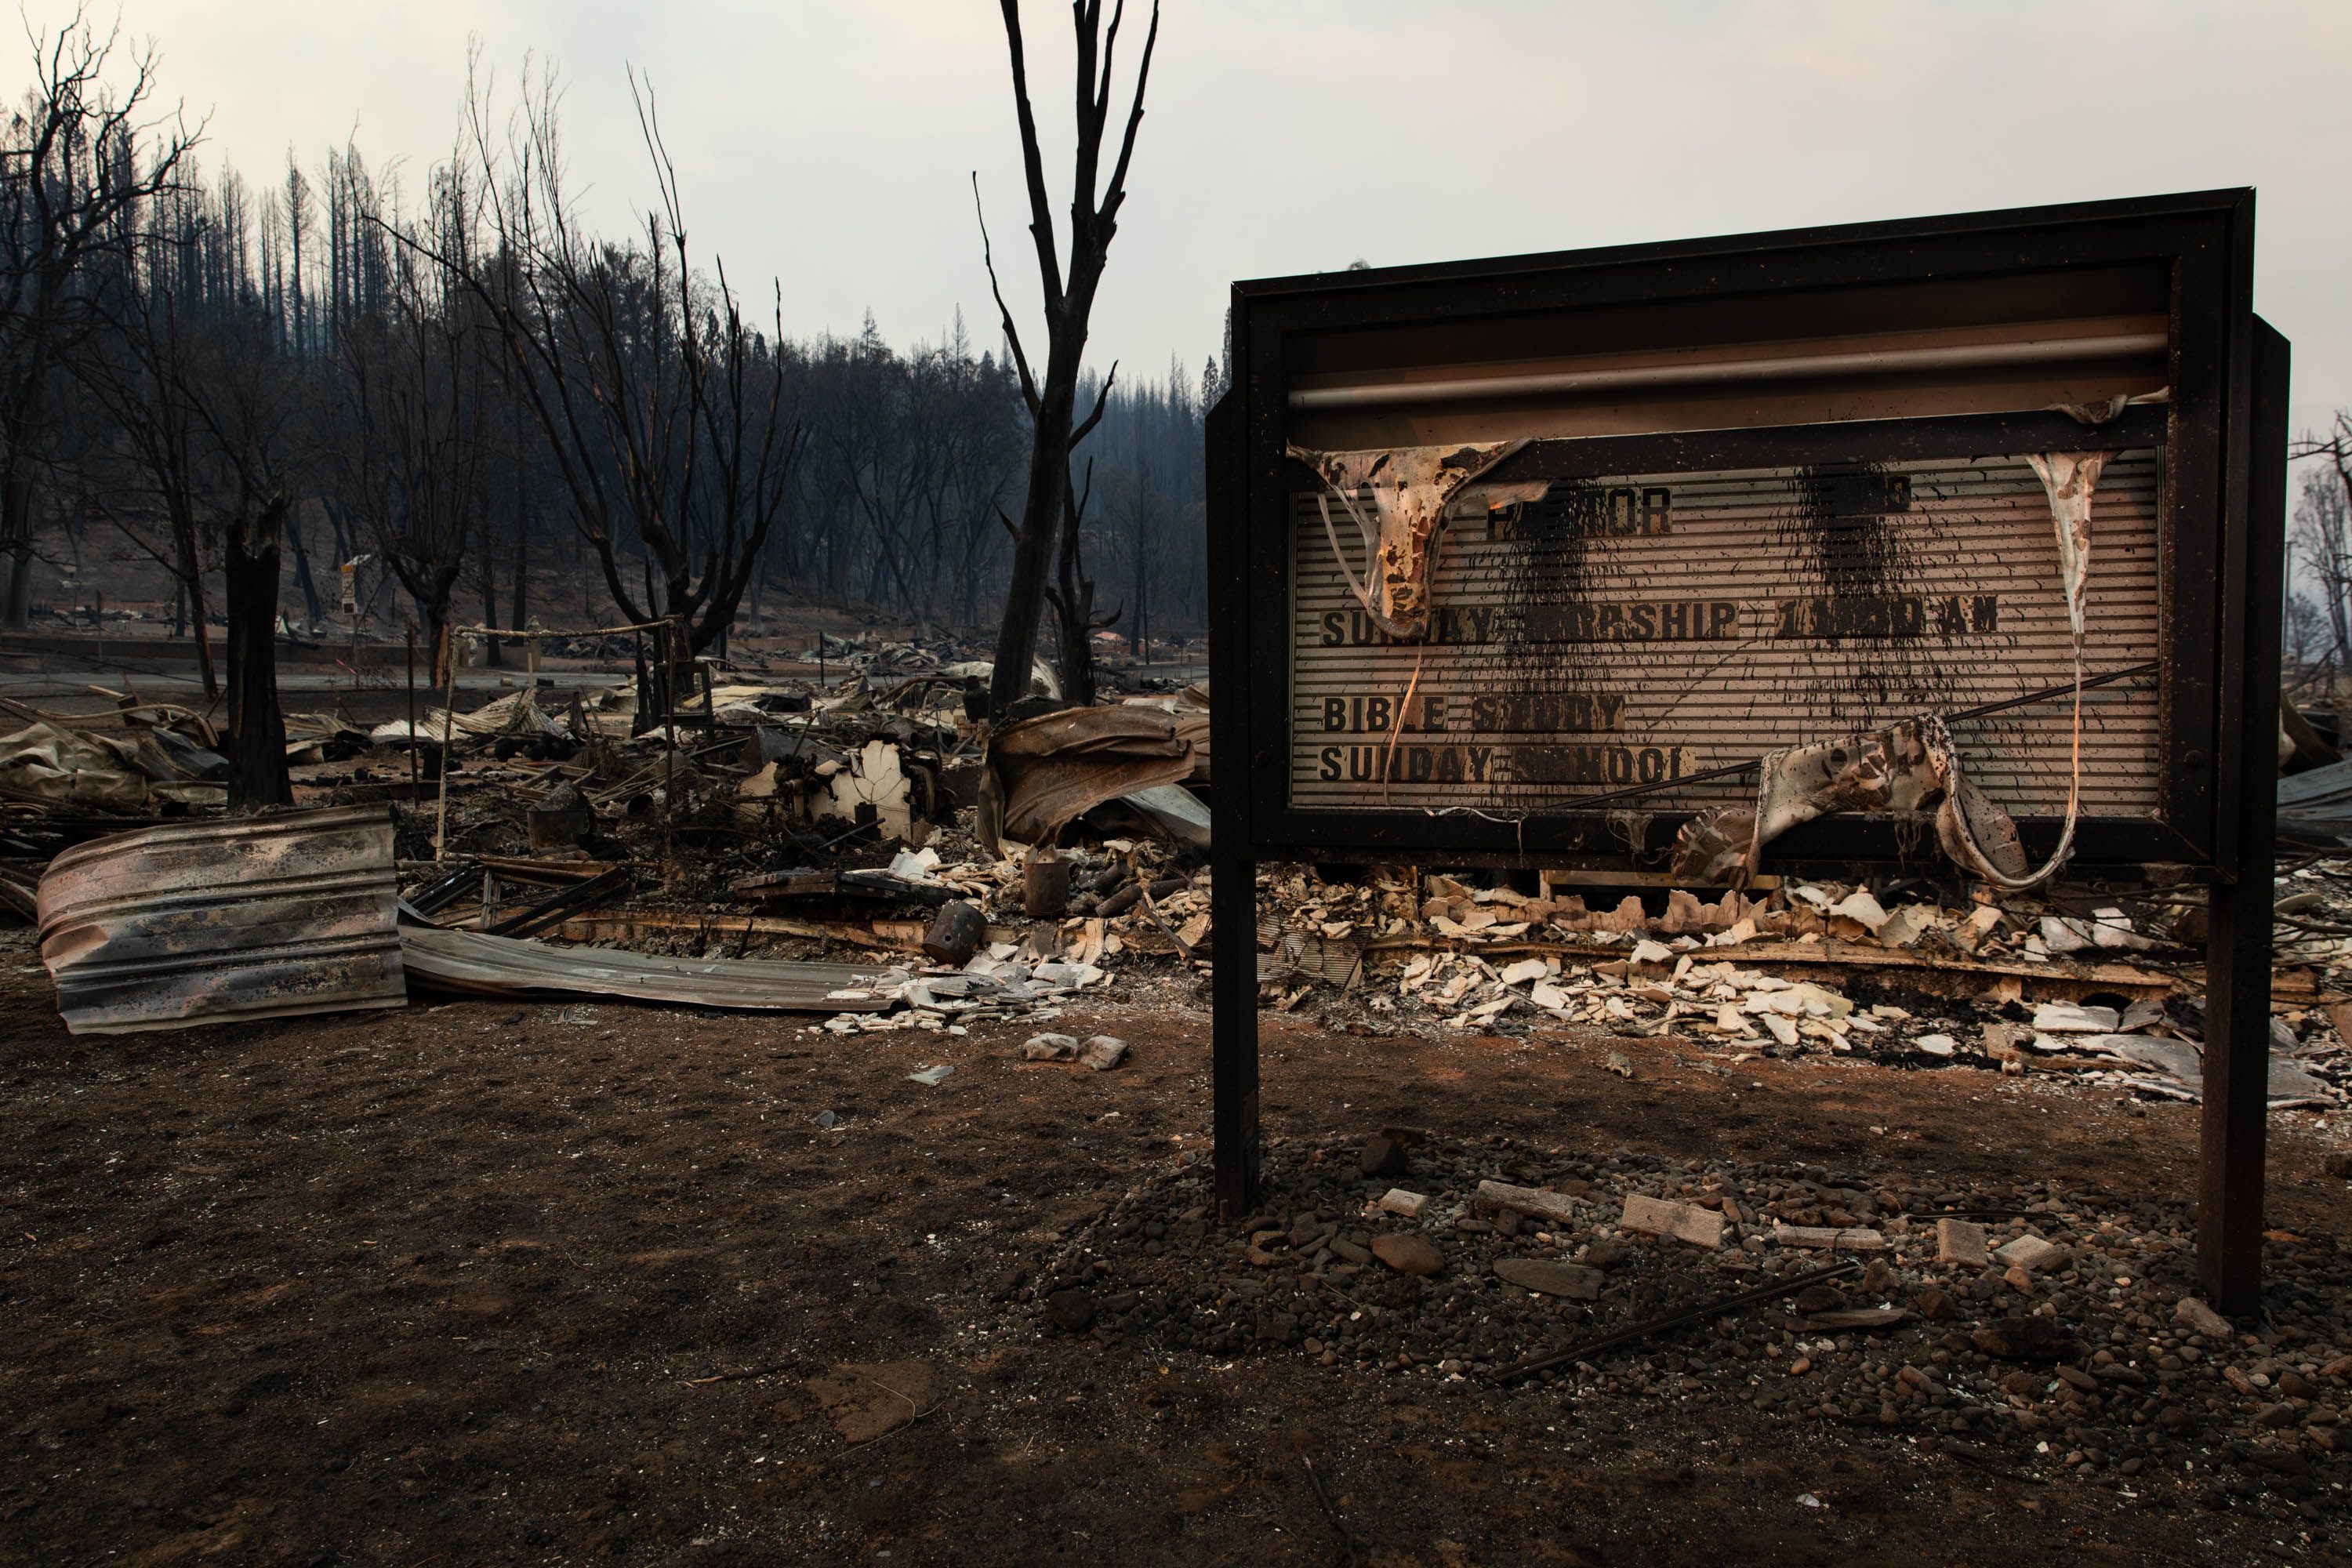 The remnants of a church sign near the burned remains of the church building in California 